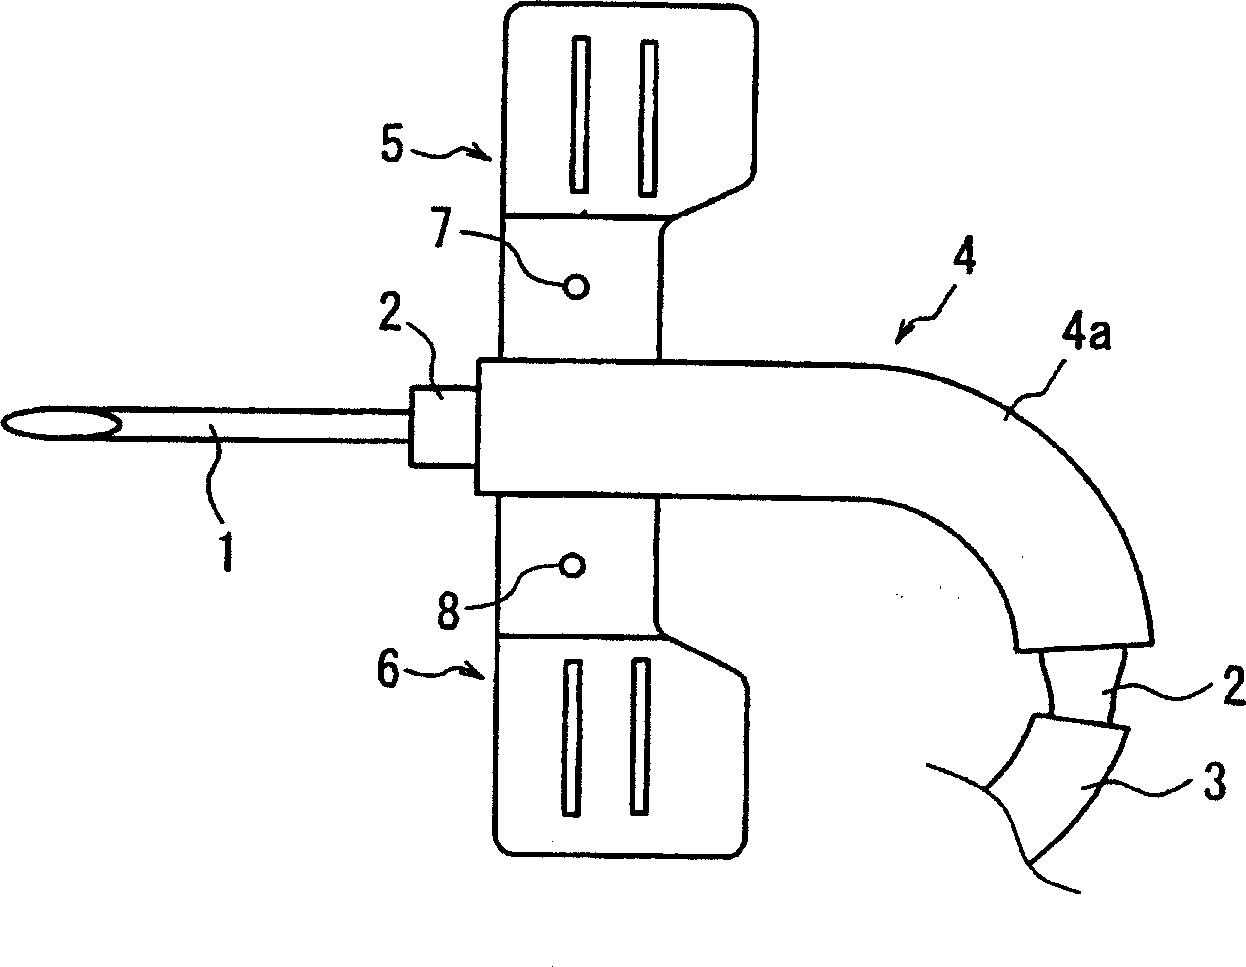 Medical needle device having shield with wings